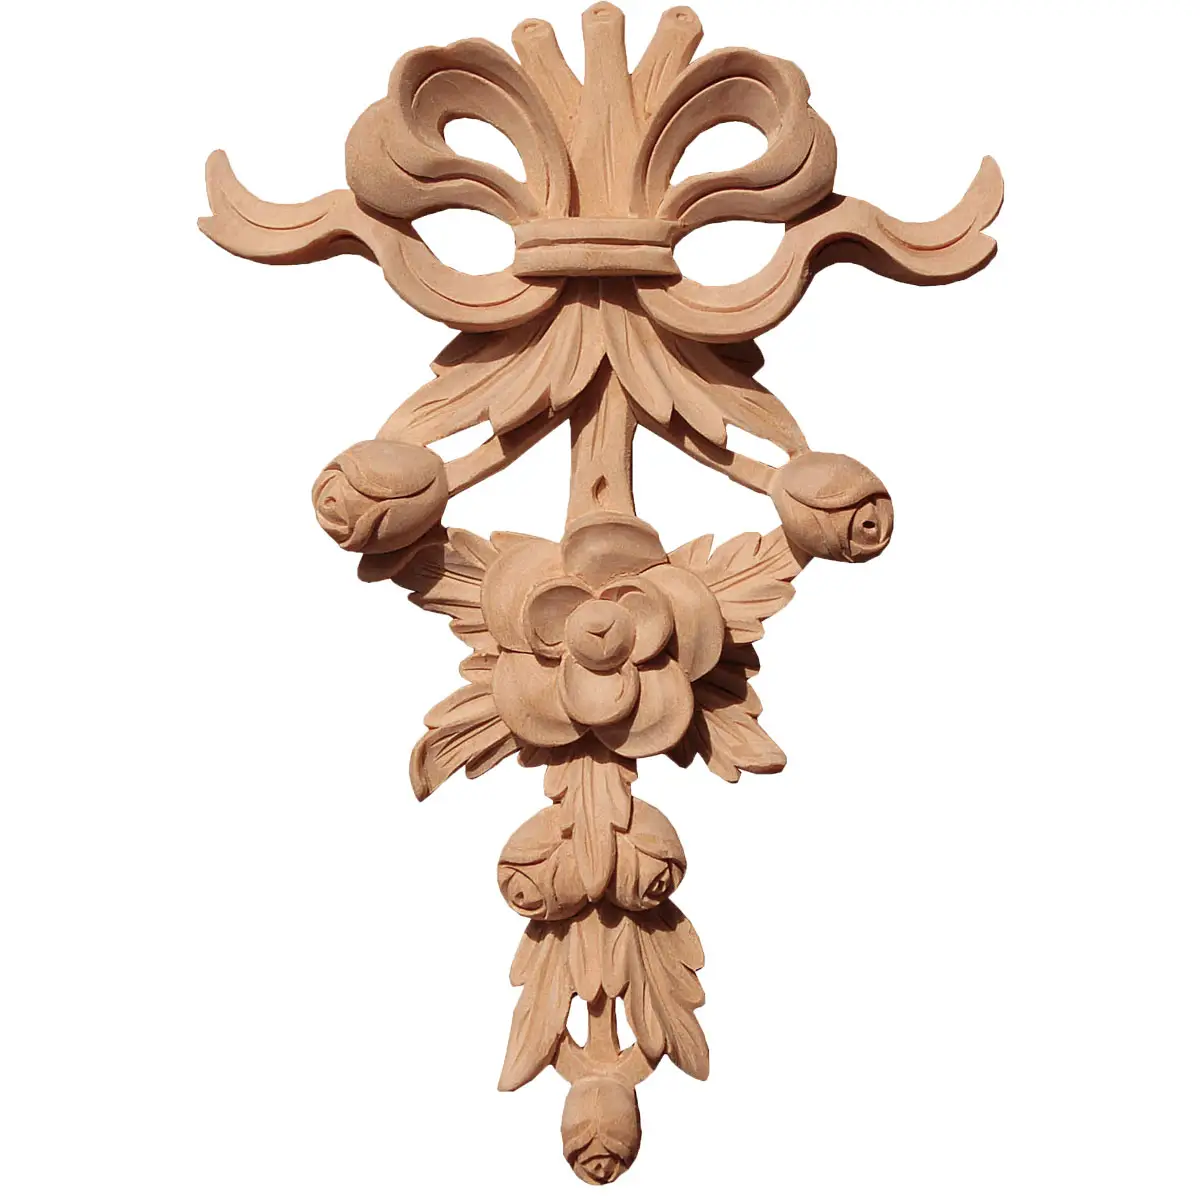 Maderotherapy Wood Carving Square Flower Pieces Decal Roman Column Toe Door Table Decoration Wood Solid Carving Ornamental Onlay